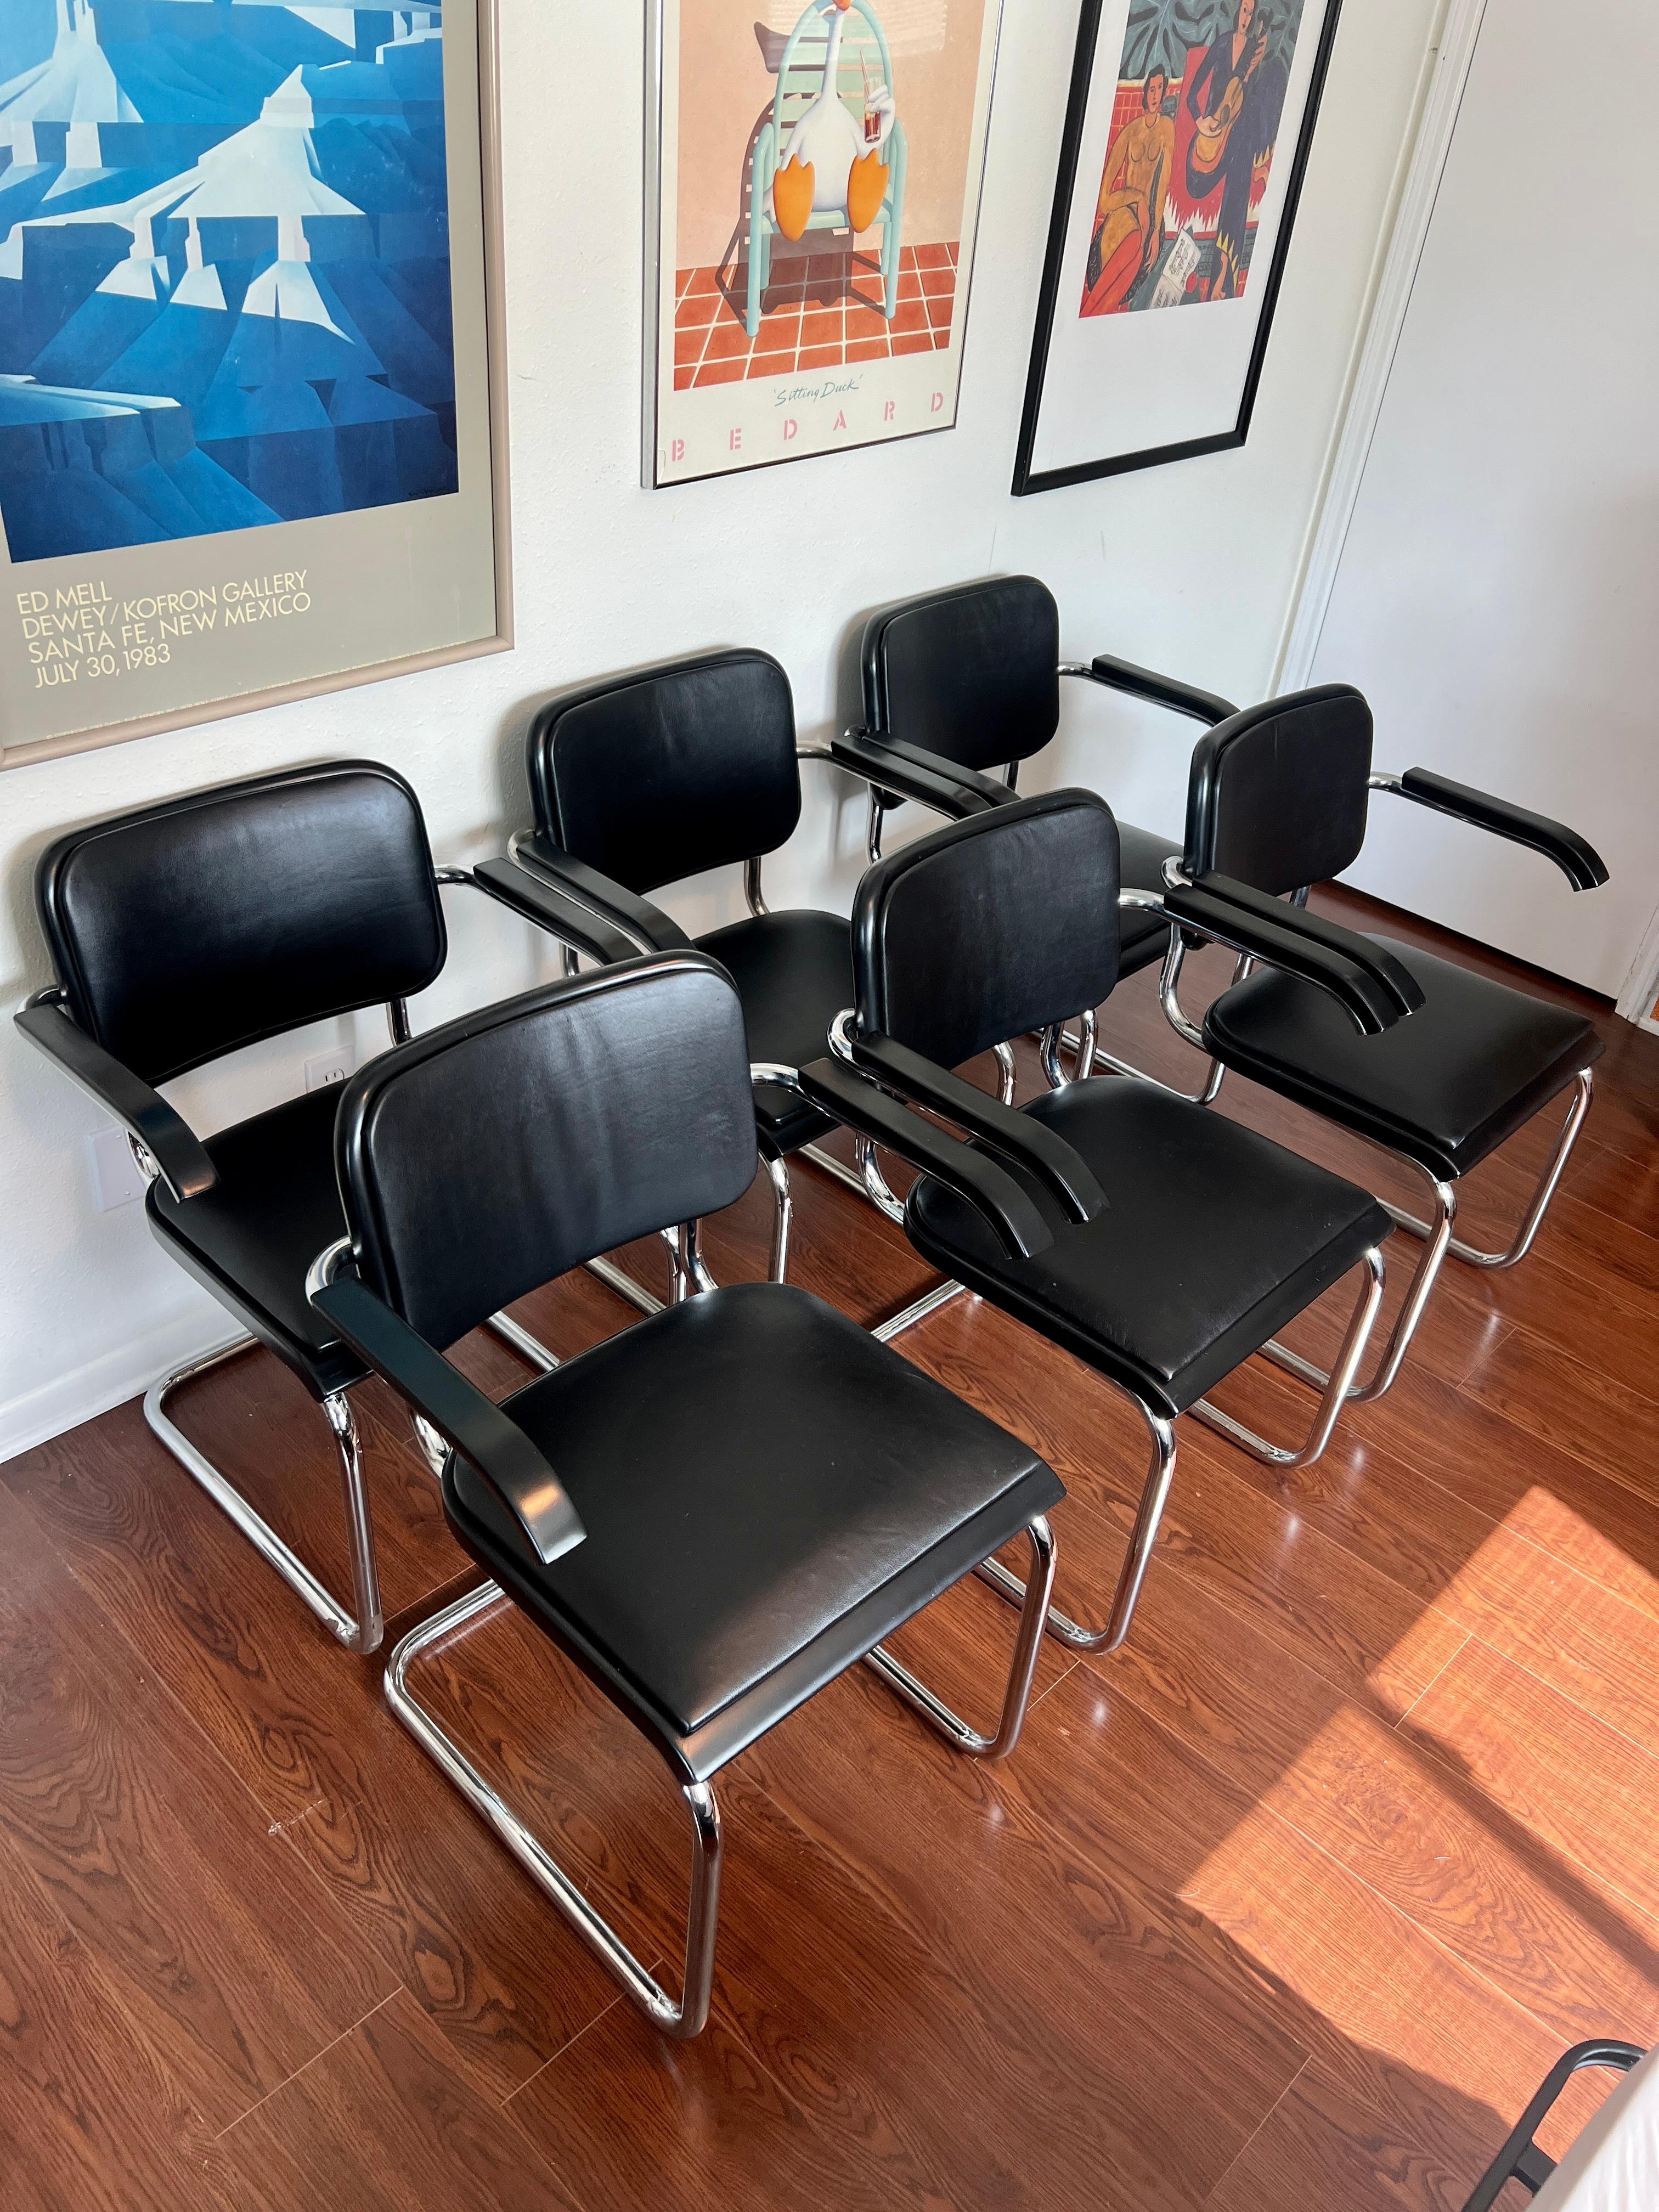 Original ICONIC set of 6 chairs by Marcel Breuer for Thonet model S64. With the original tags from the Enron building circa 1986. A part of Houston history. Newly reupholstered in a premium black cowhide leather and the black frames have also been